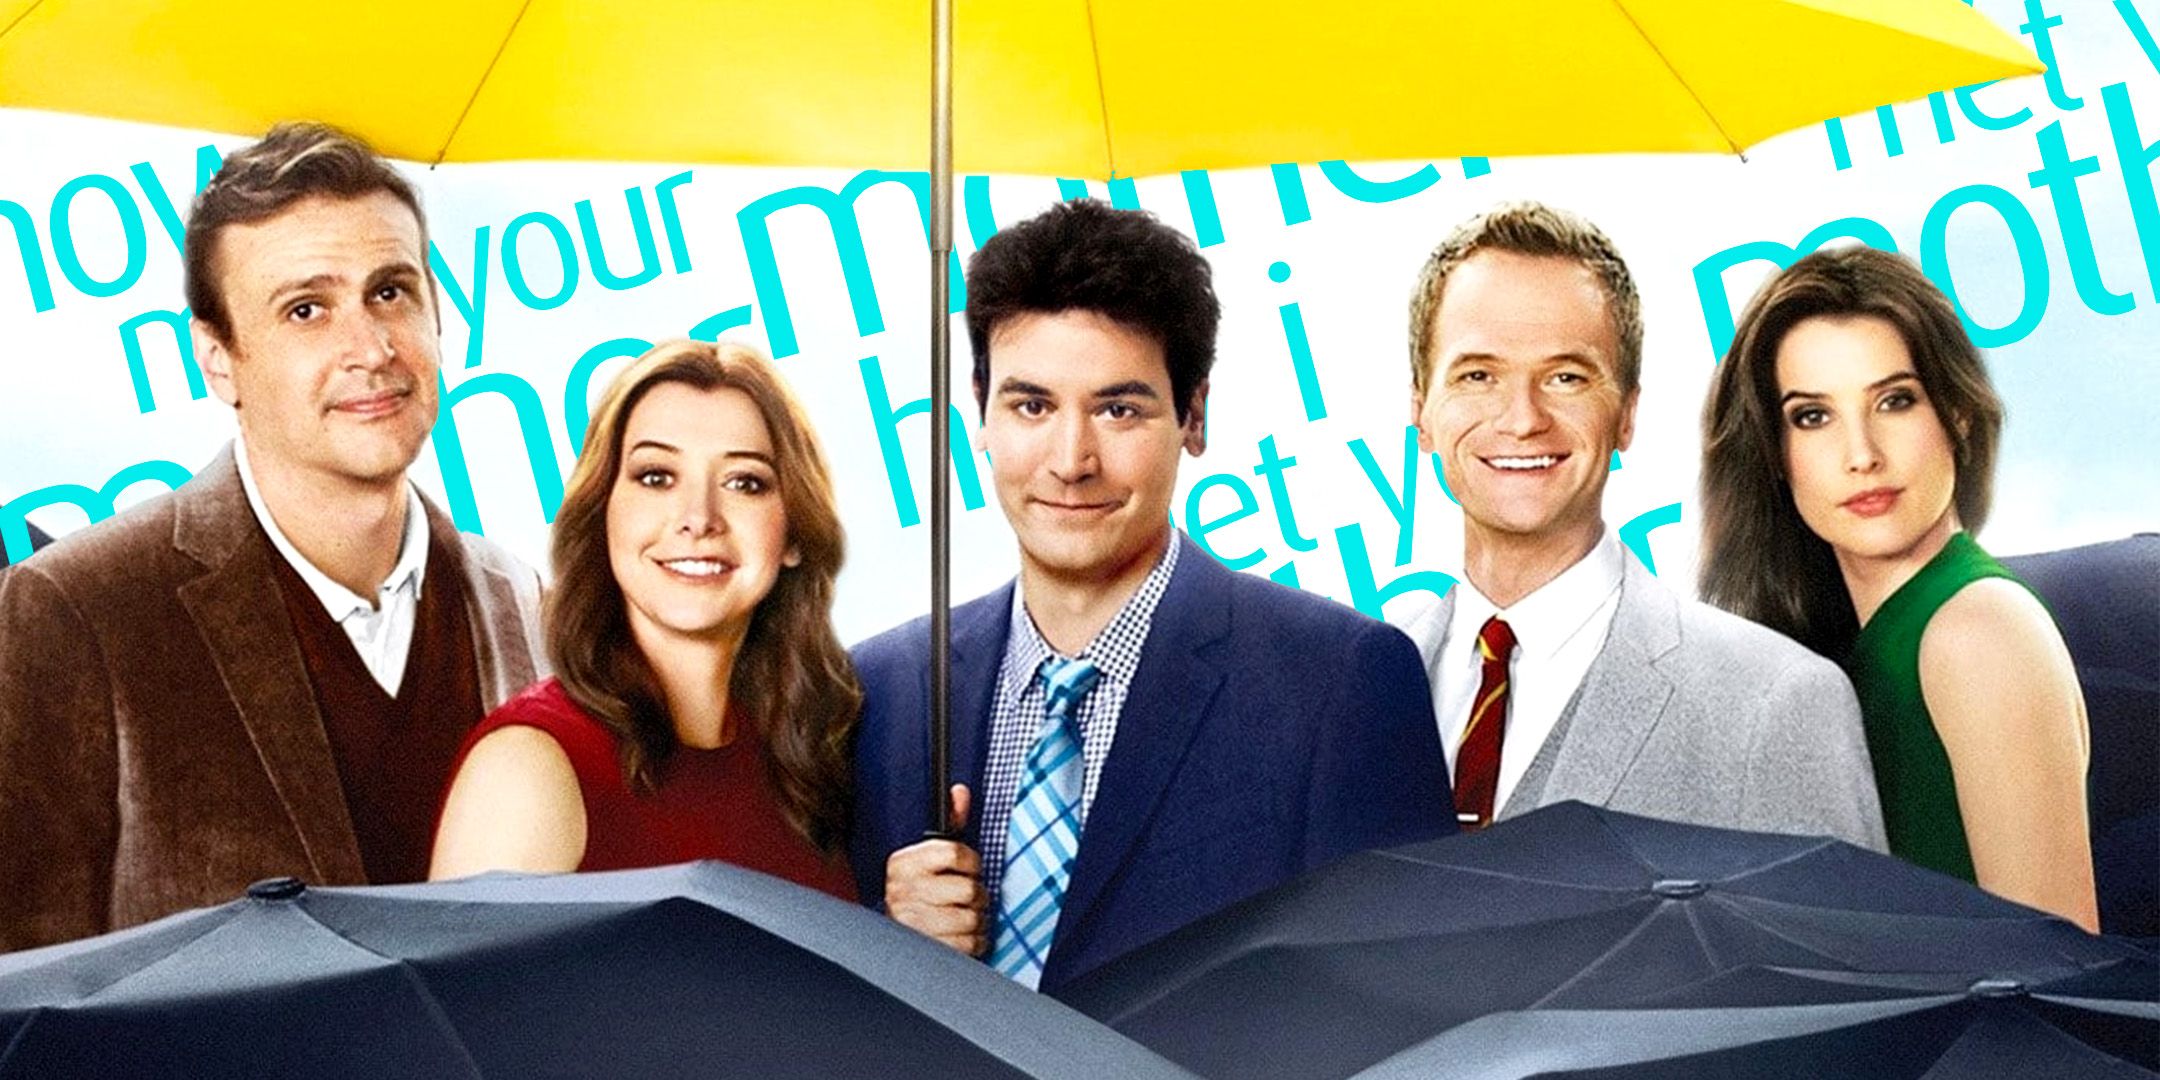 HOW I MET YOUR MOTHER CAST SALARY 